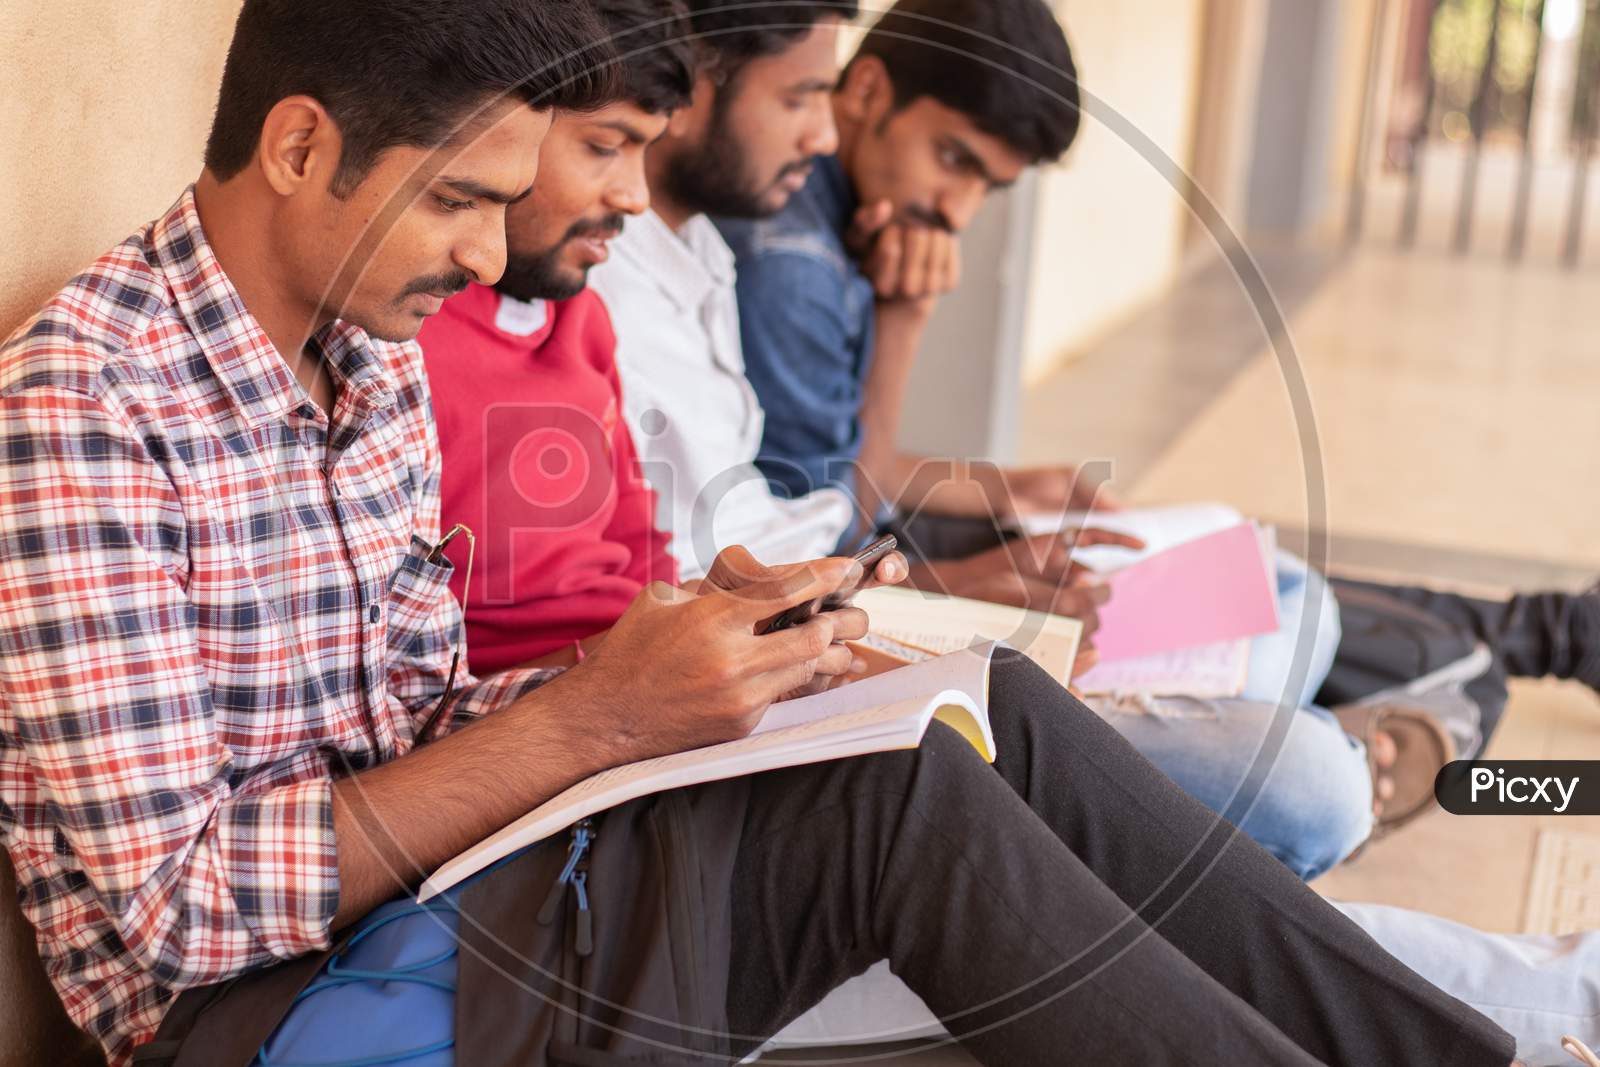 A student using a mobile phone while others are studying by Looking Into Books At College - Education, Learning Student, People Concept